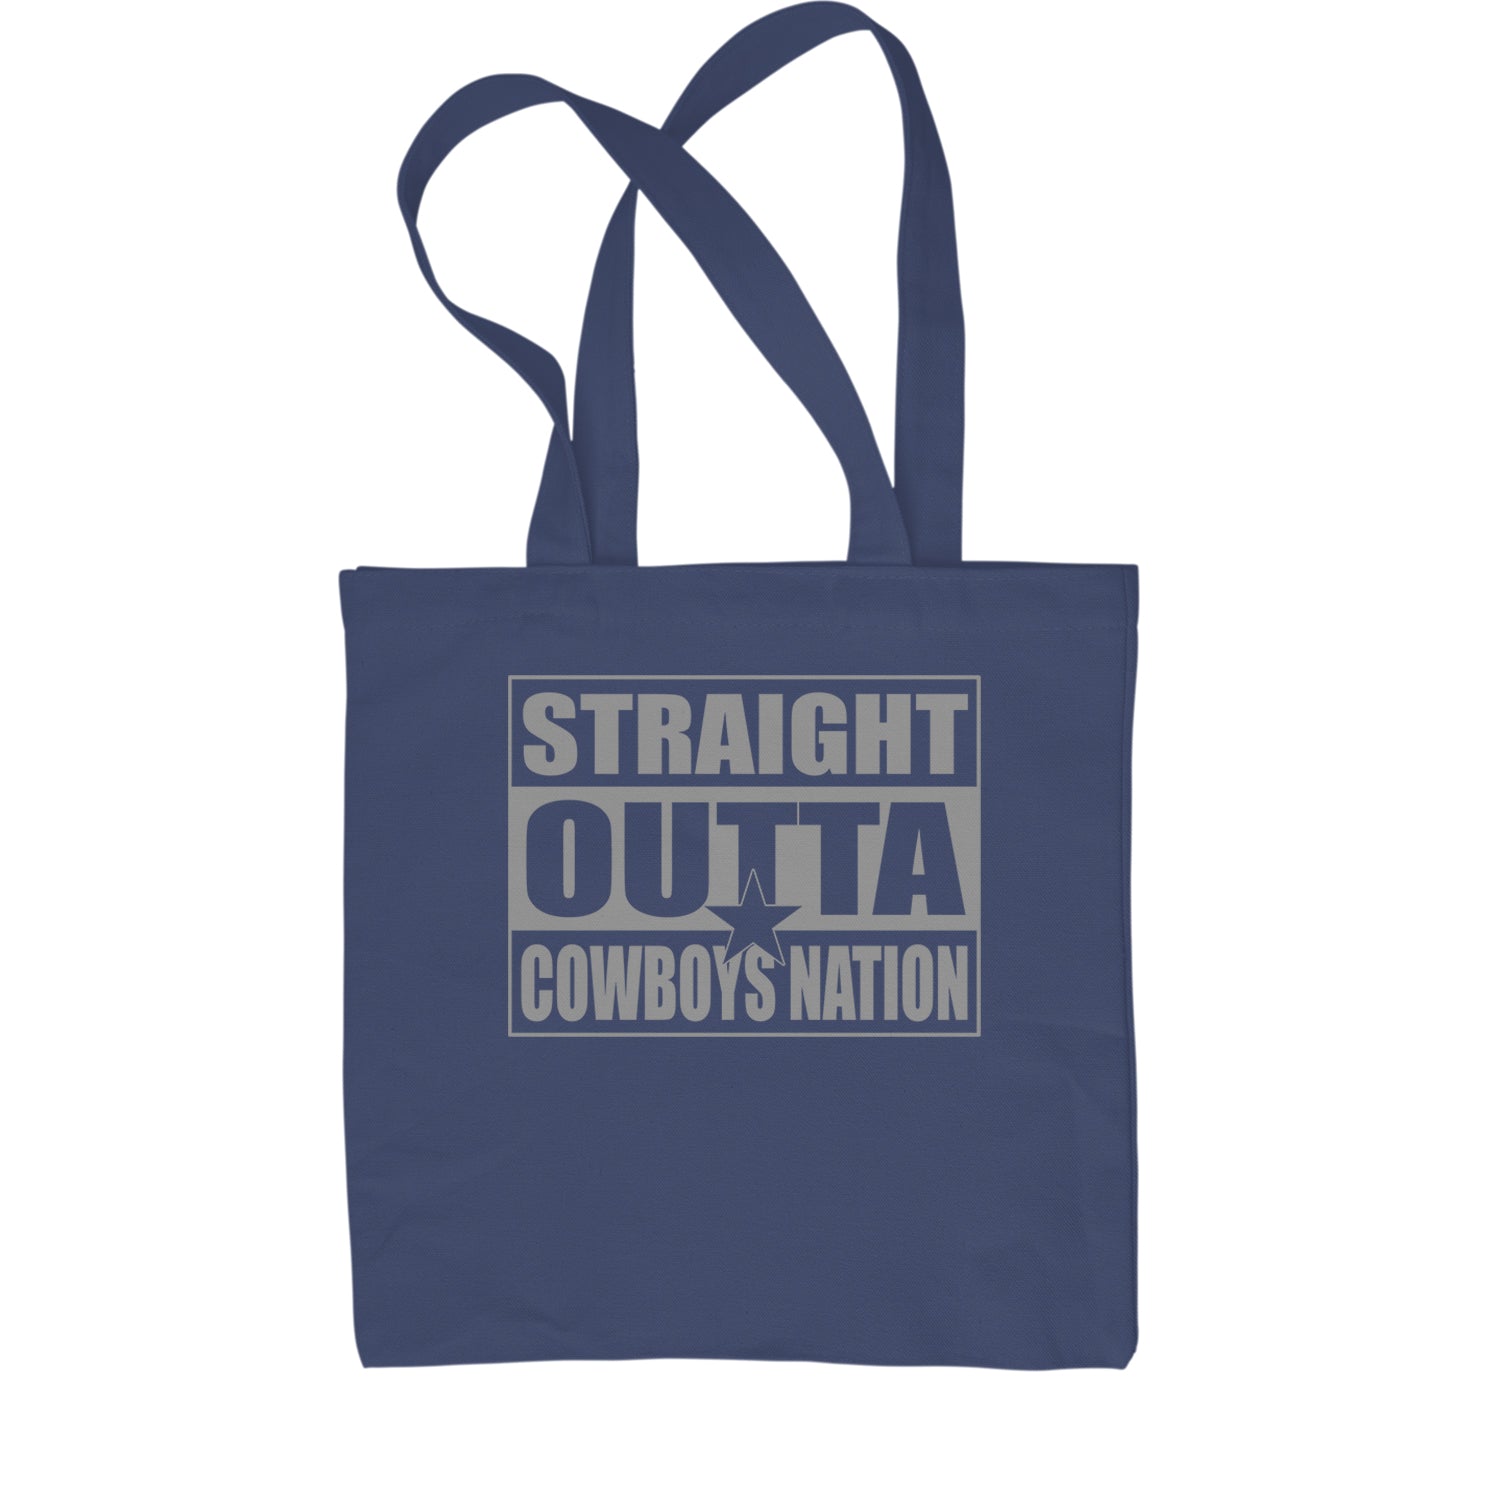 Straight Outta Cowboys Nation   Shopping Tote Bag